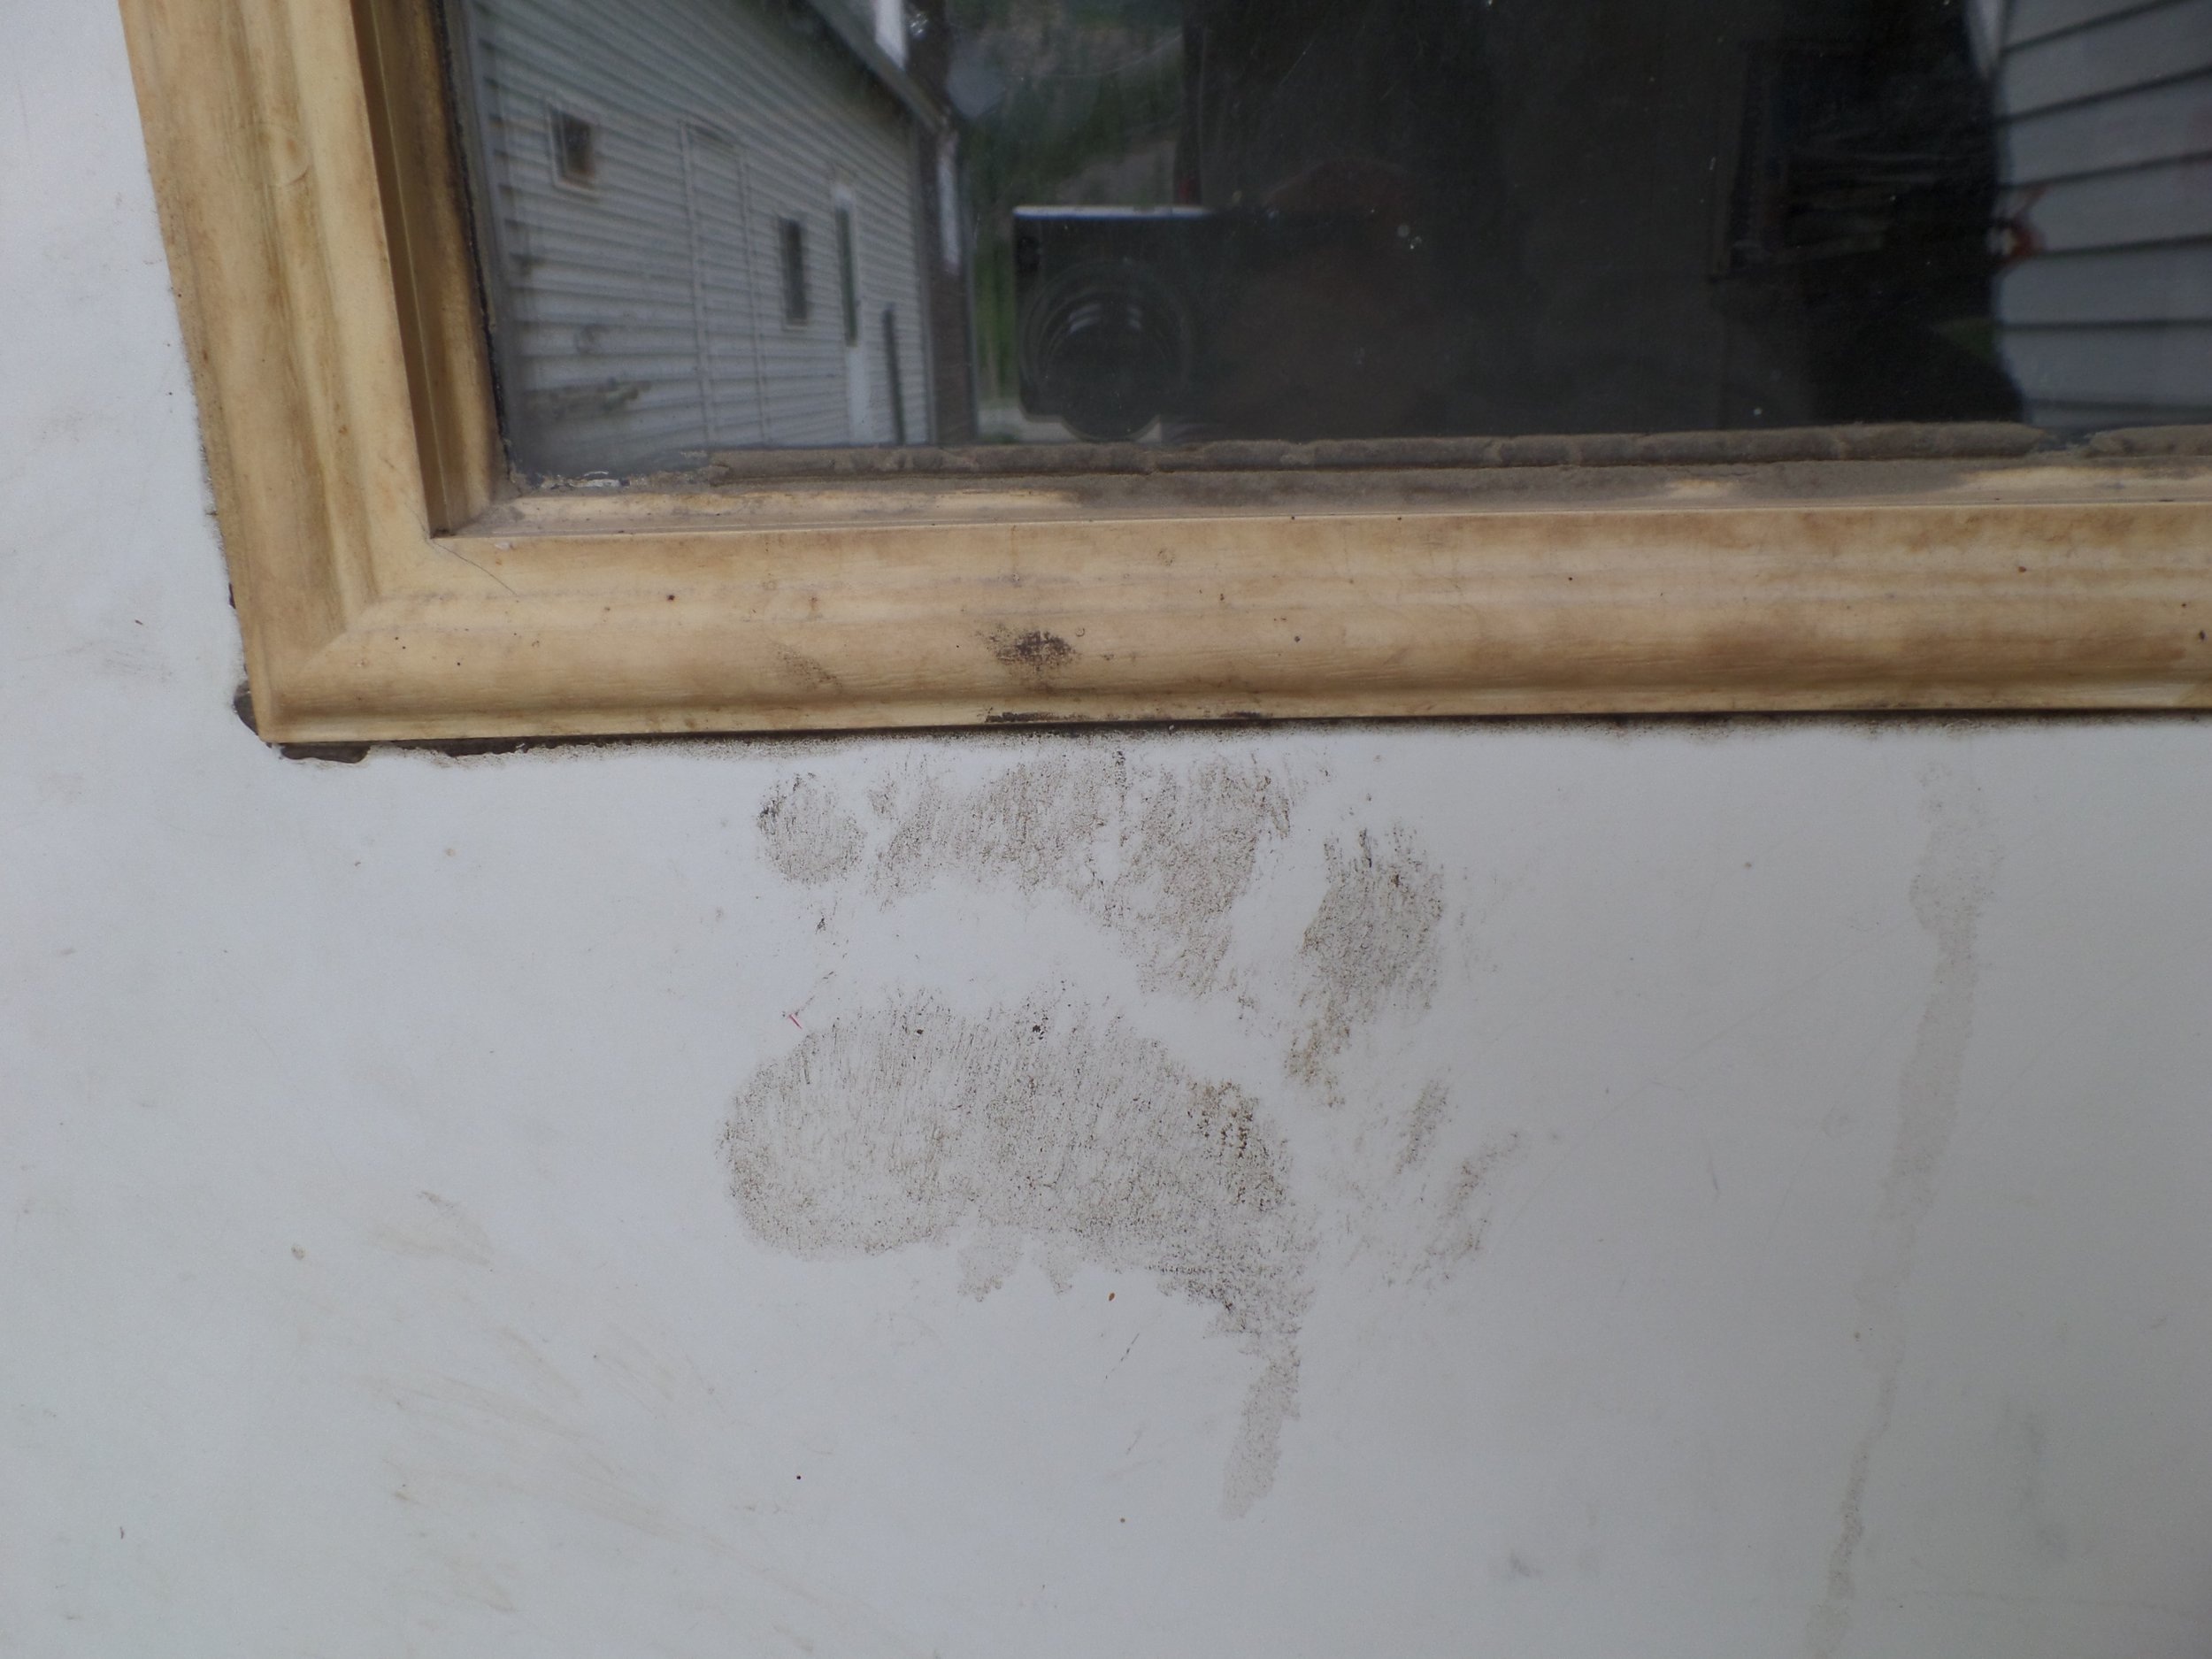  Bear paw print on the door of a local business.  Bears are very curious and are capable of opening doors on buildings and cars. 